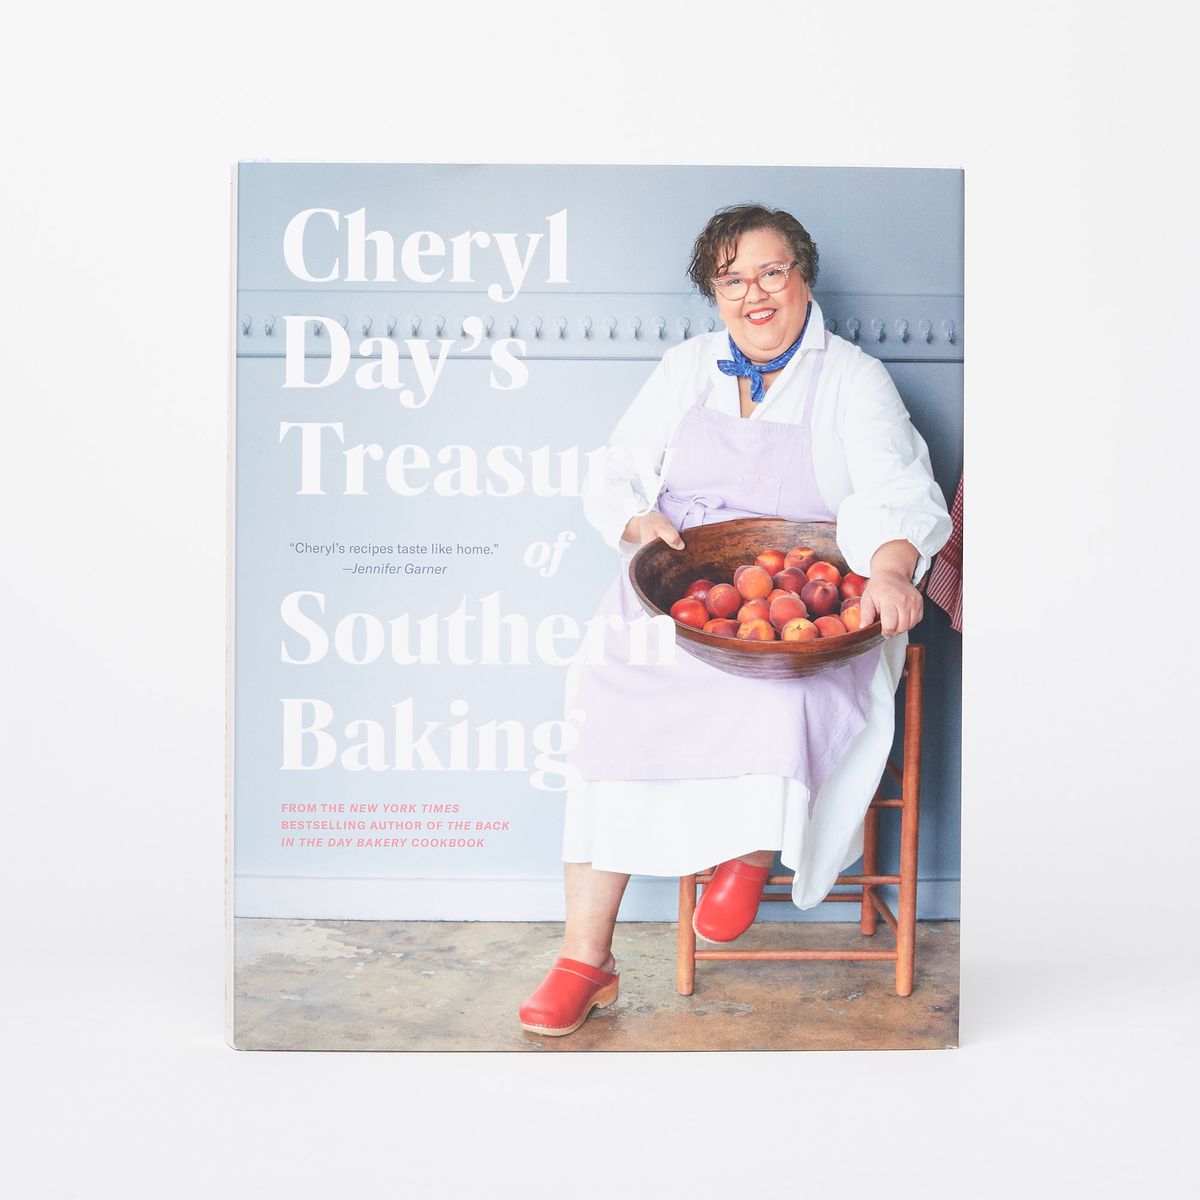 Cover of a cookbook that reads "Cheryl Day's Treasury of Southern Baking" over a photo of a person sitting in a chair holding a large wooden bowl of peach